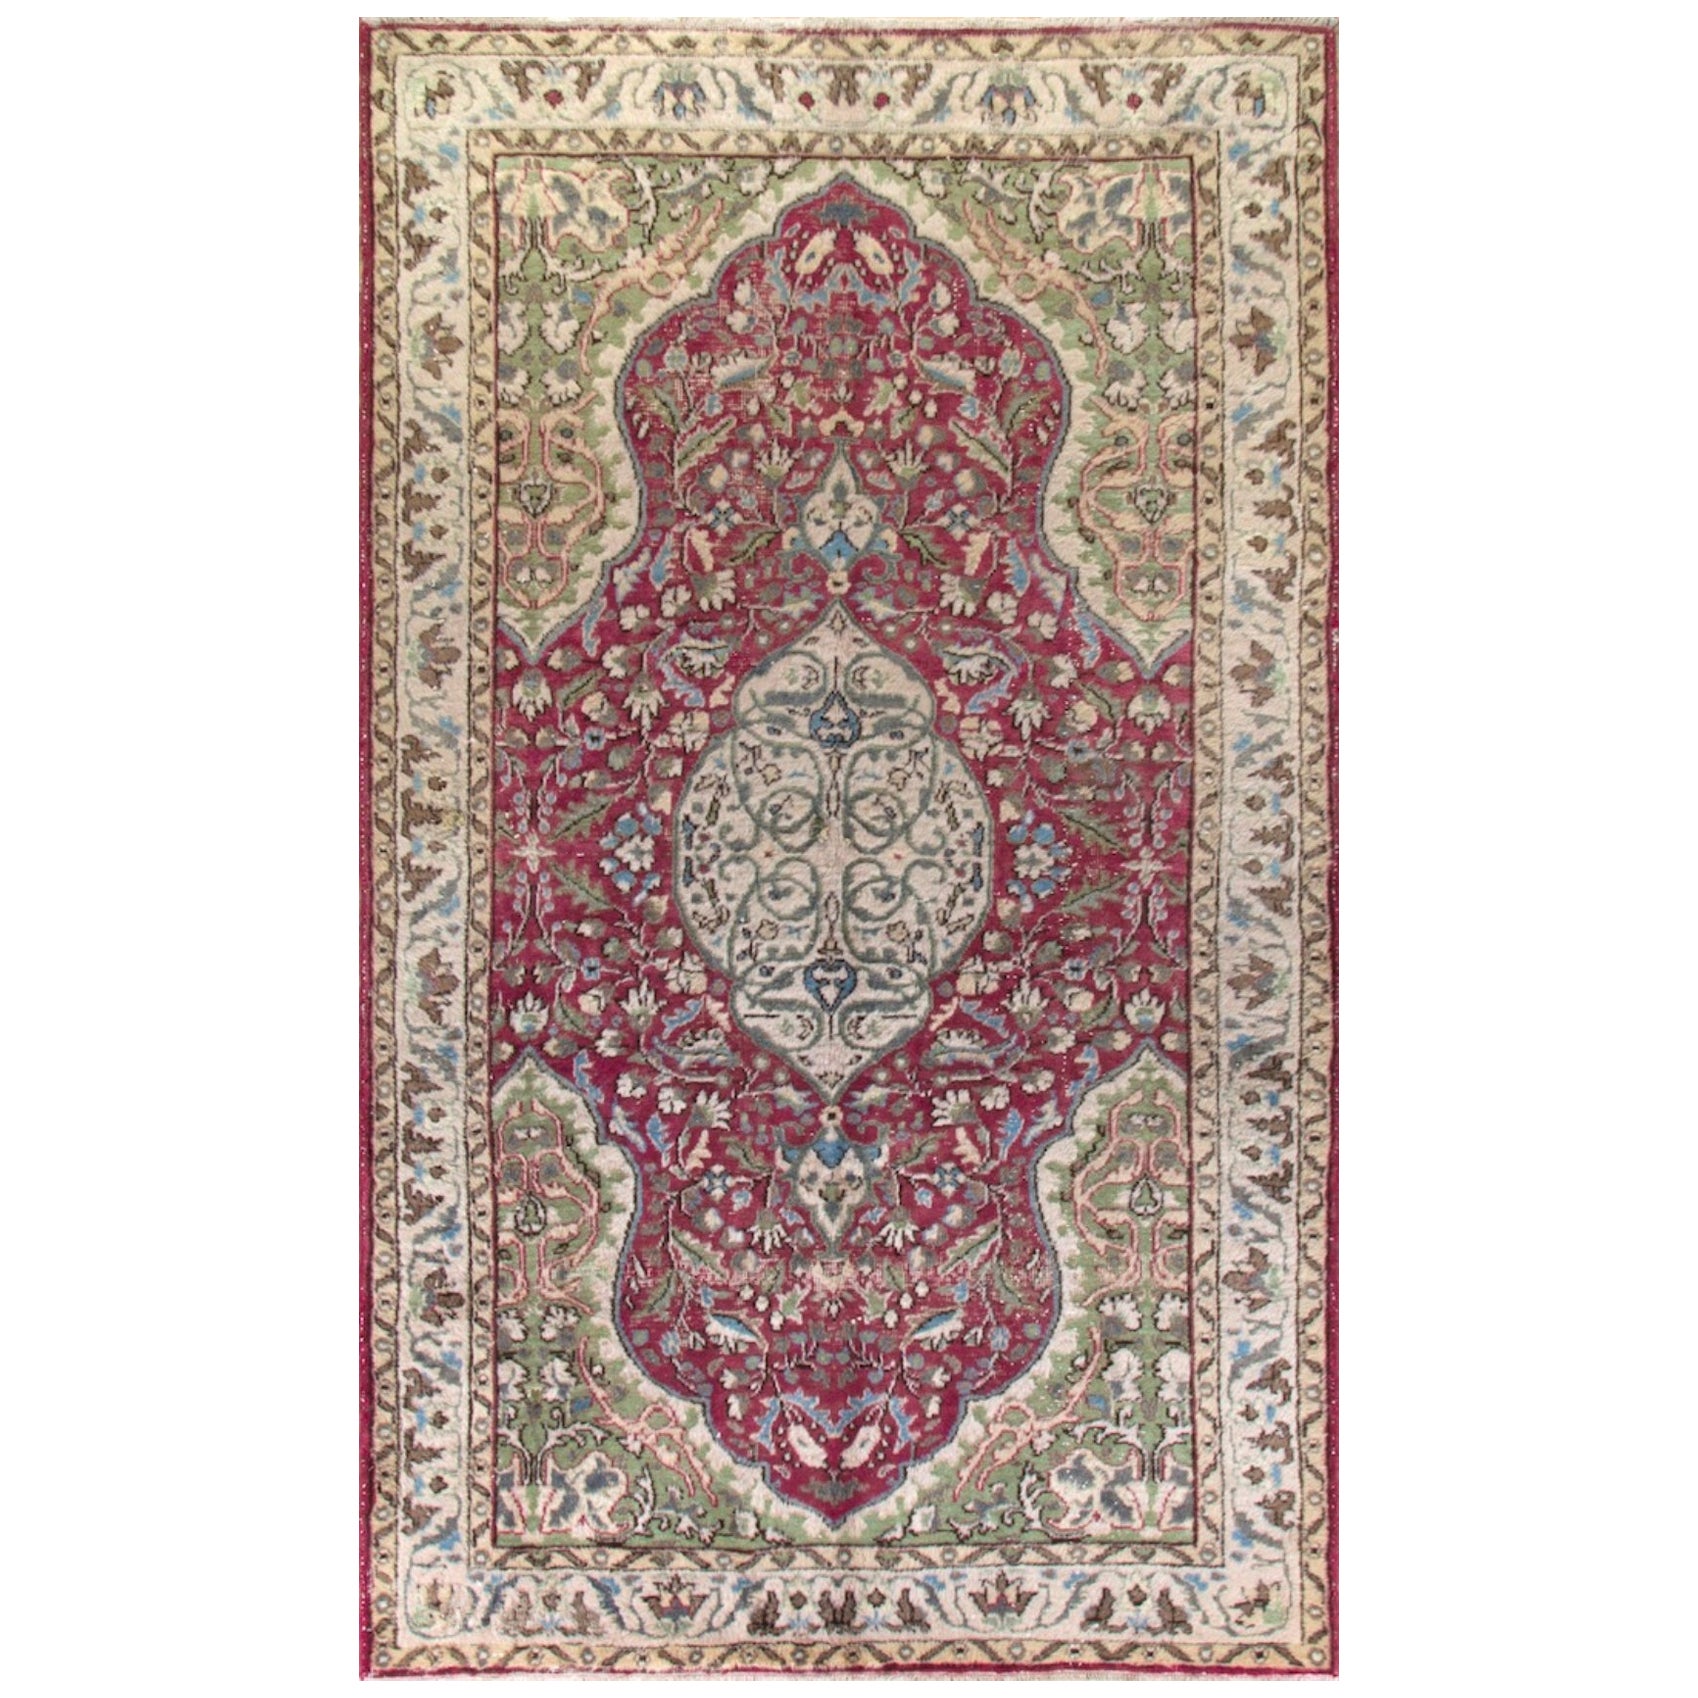 5.6x9.2 Ft Vintage Oriental Rug in Red and Green, Hand Knotted Wool Carpet